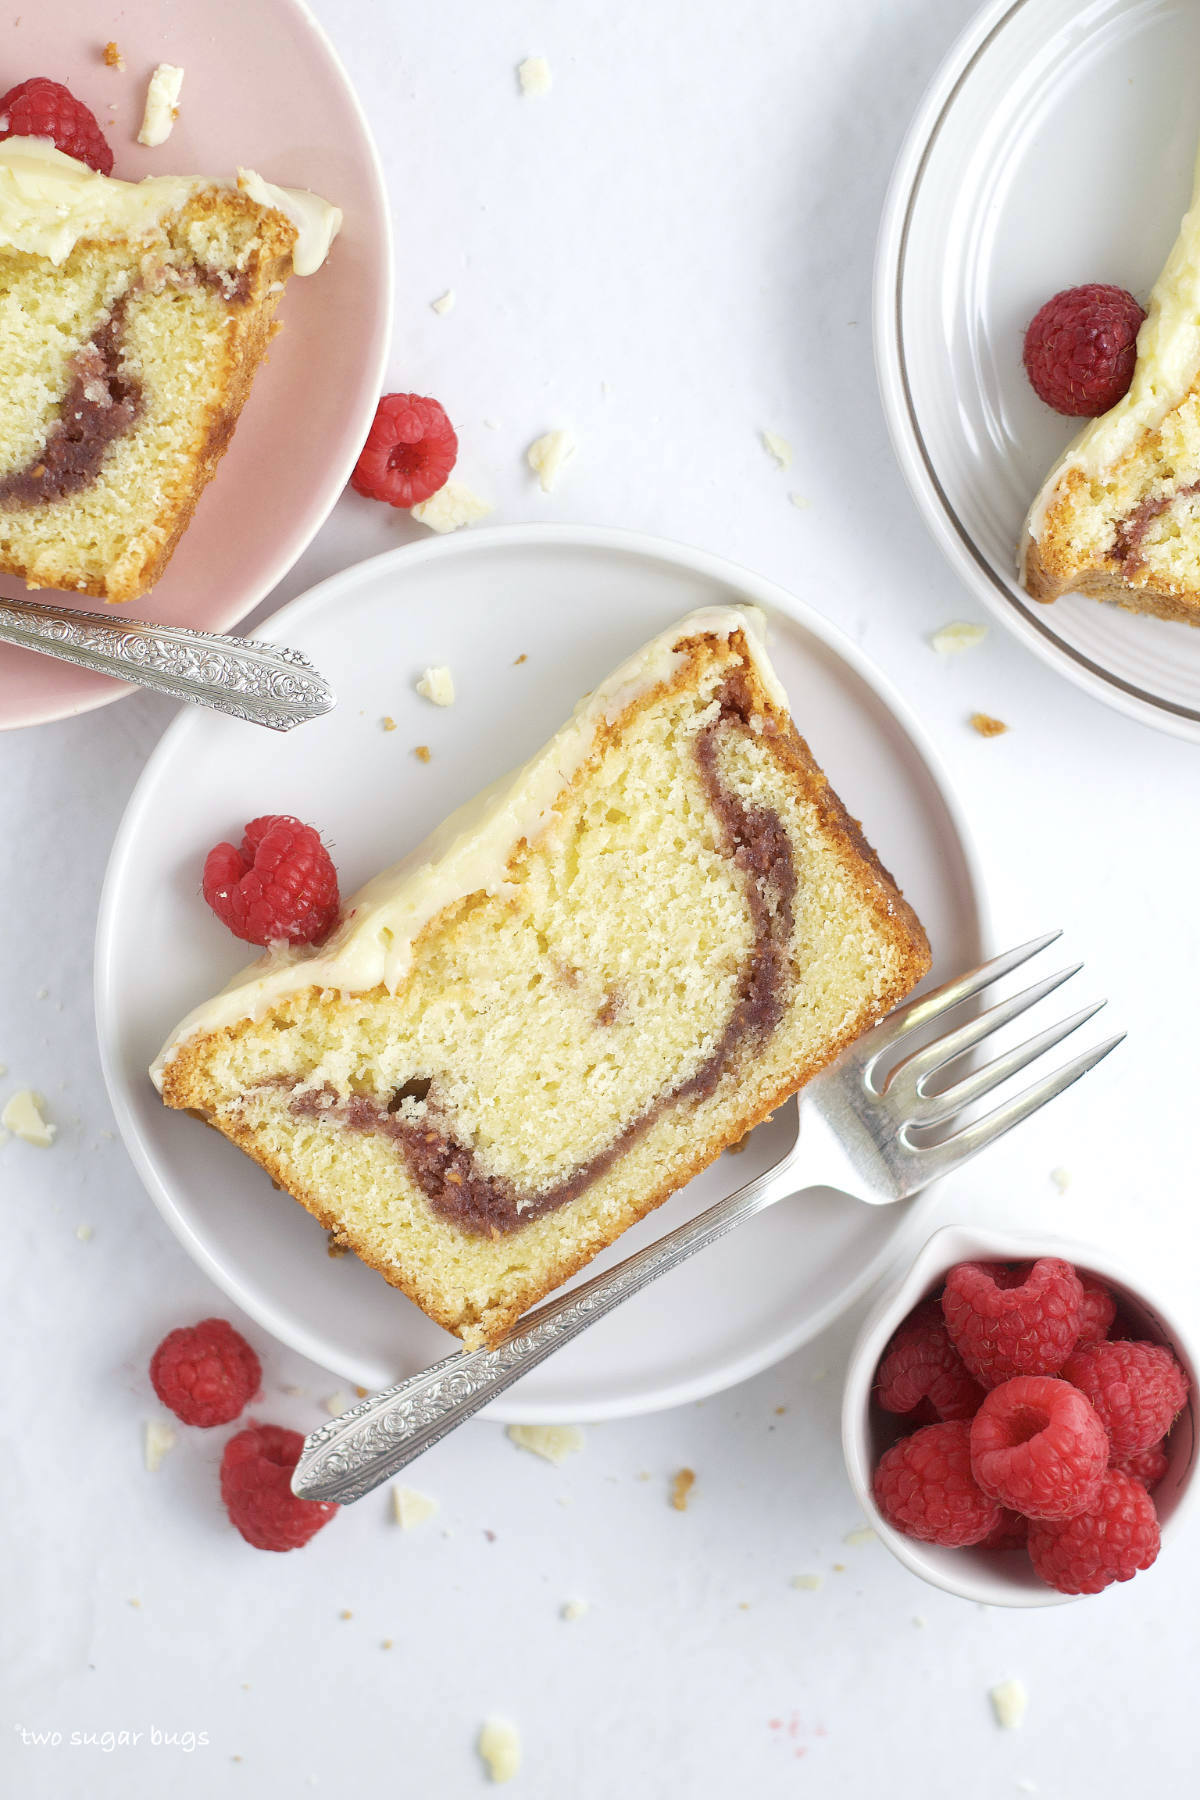 slices of raspberry white chocolate cake on plates with forks